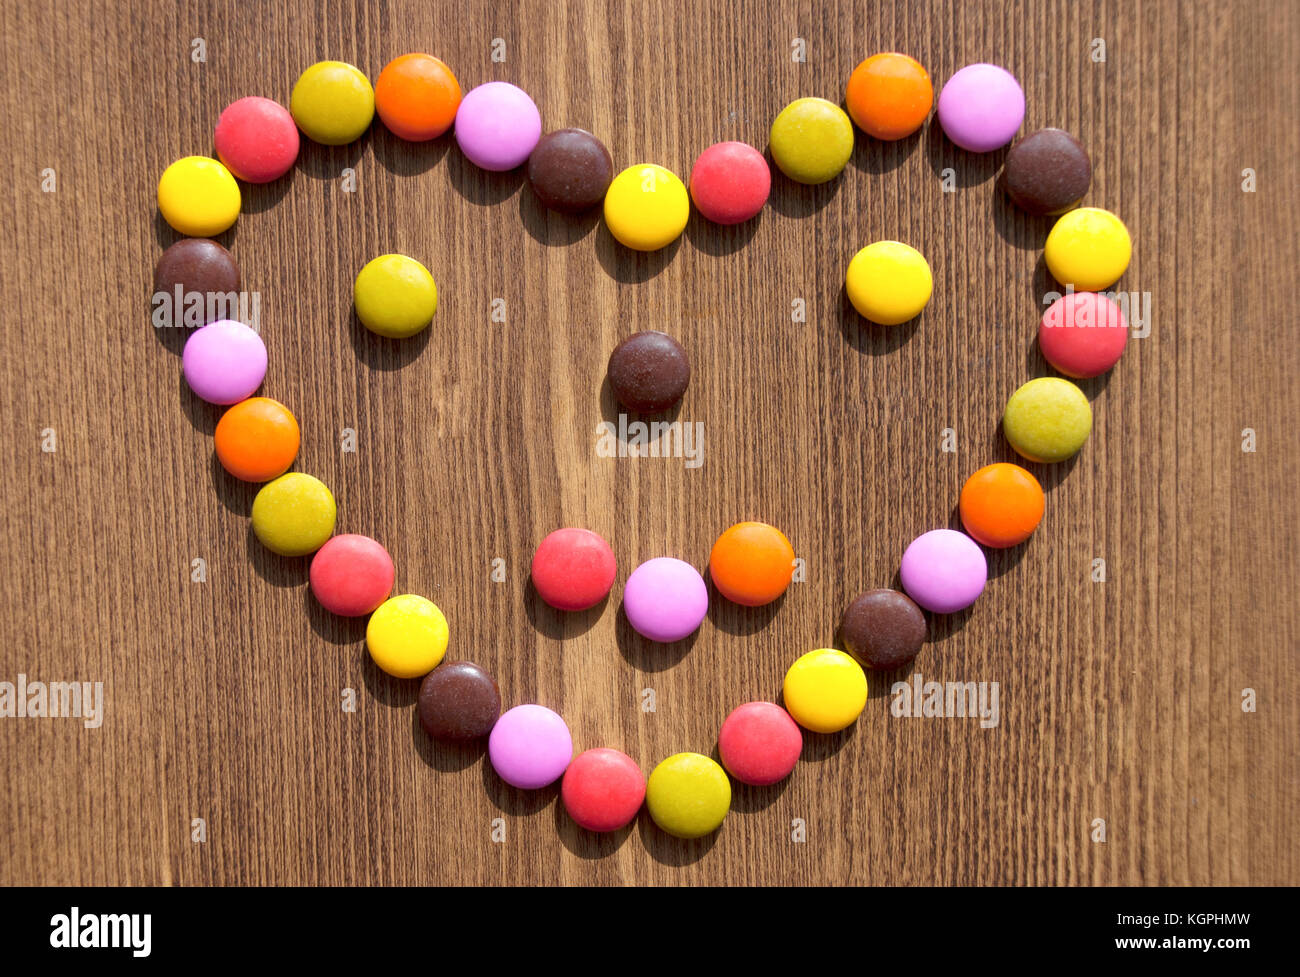 Heart made of colorful candies for bacgrounds Stock Photo